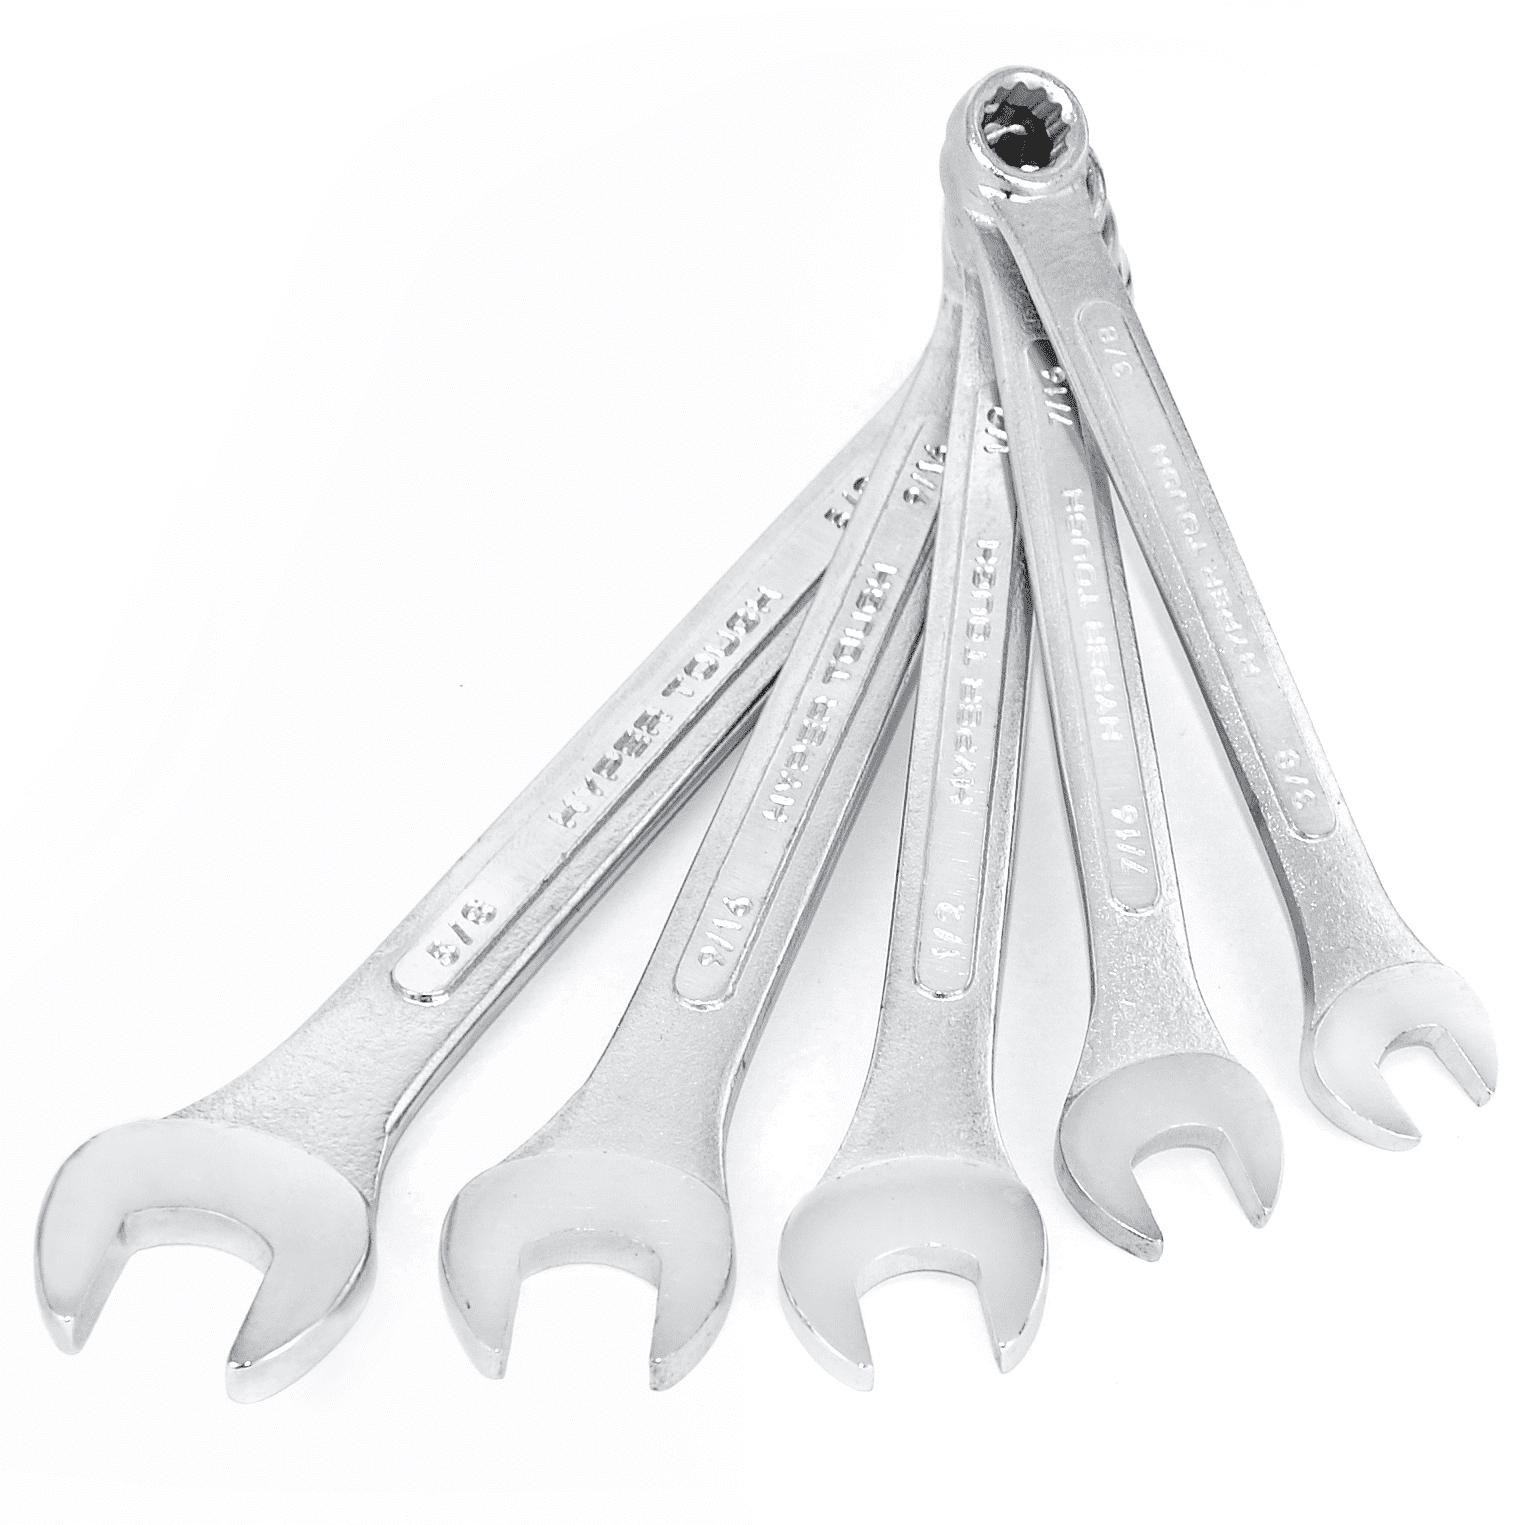 Grip Tight Tools 24721 5 piece Combination SAE Wrench Set